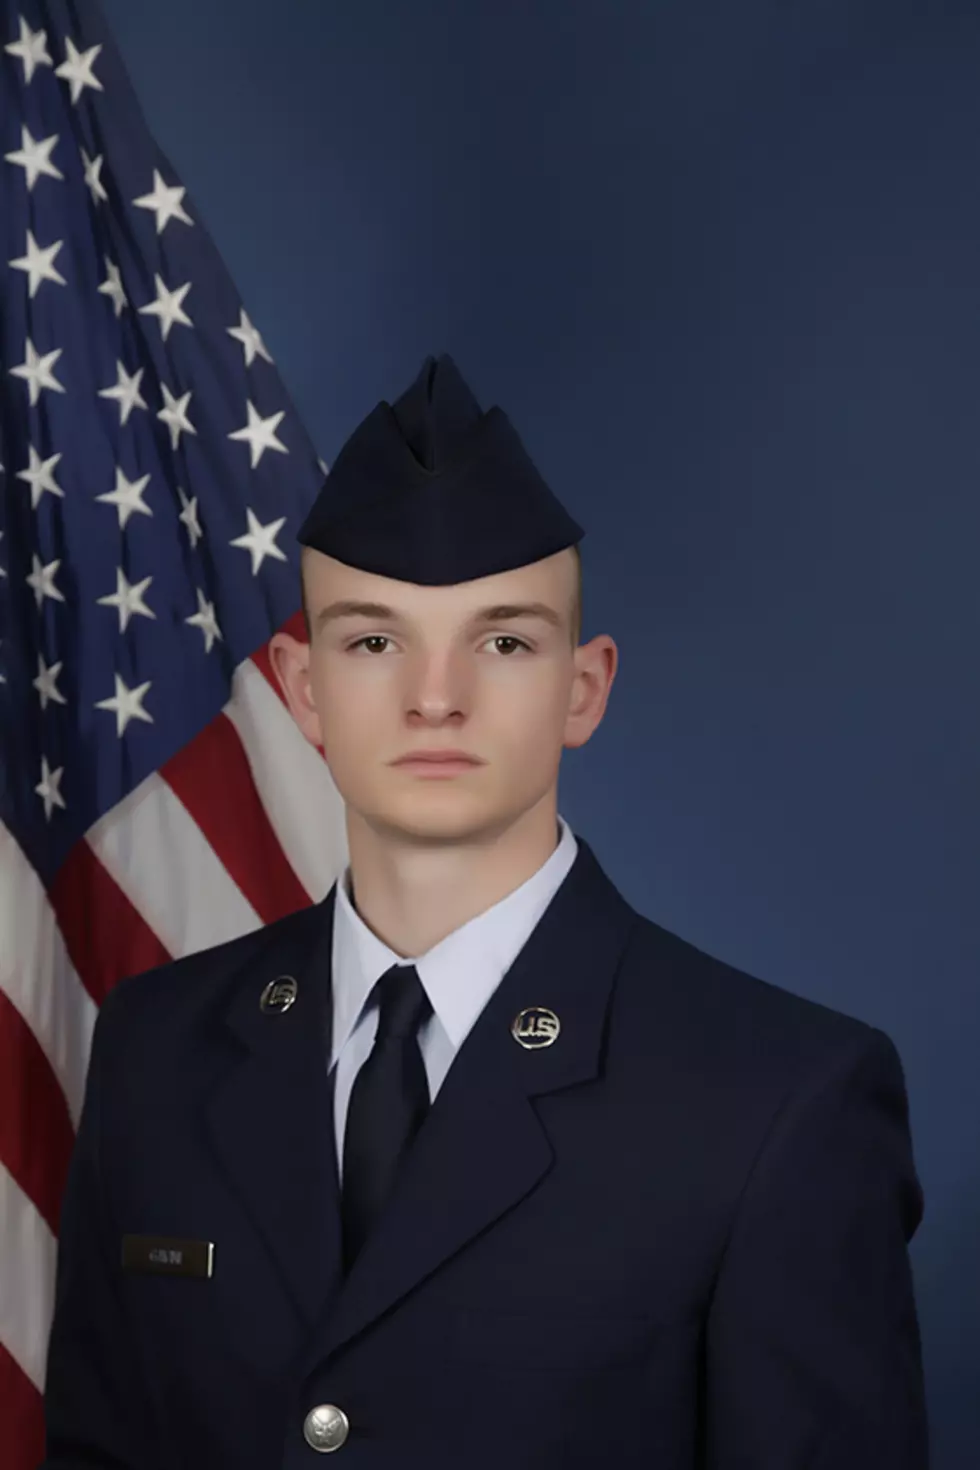 Congratulations To Michael Gavini Jr., Our Warrior of the Week